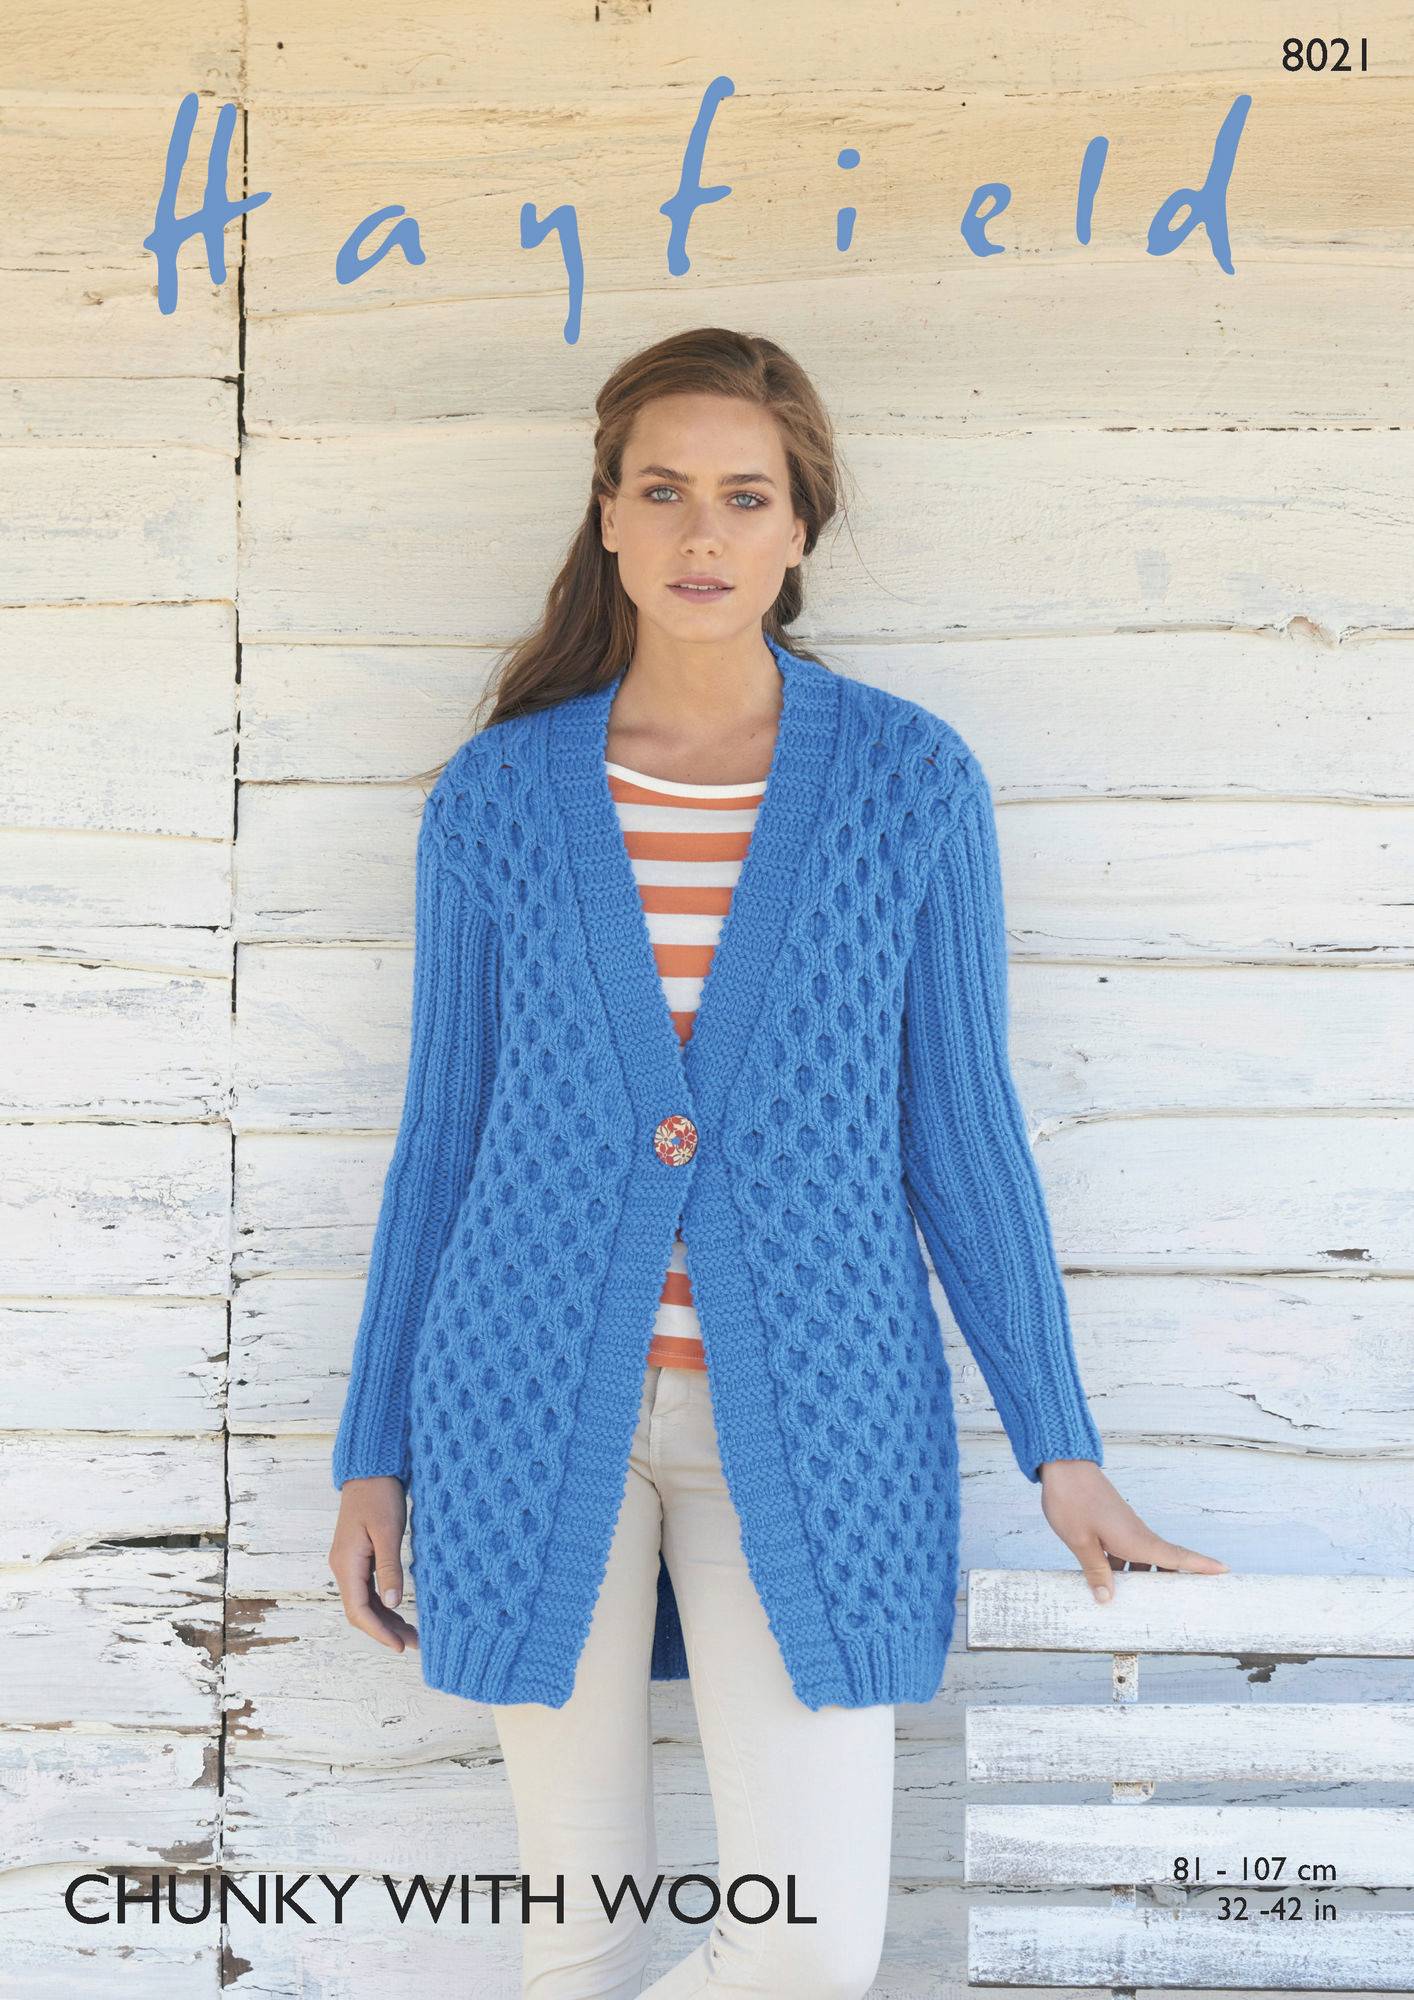 Women's Jacket in Hayfield Chunky with Wool (8021) | The Knitting Network